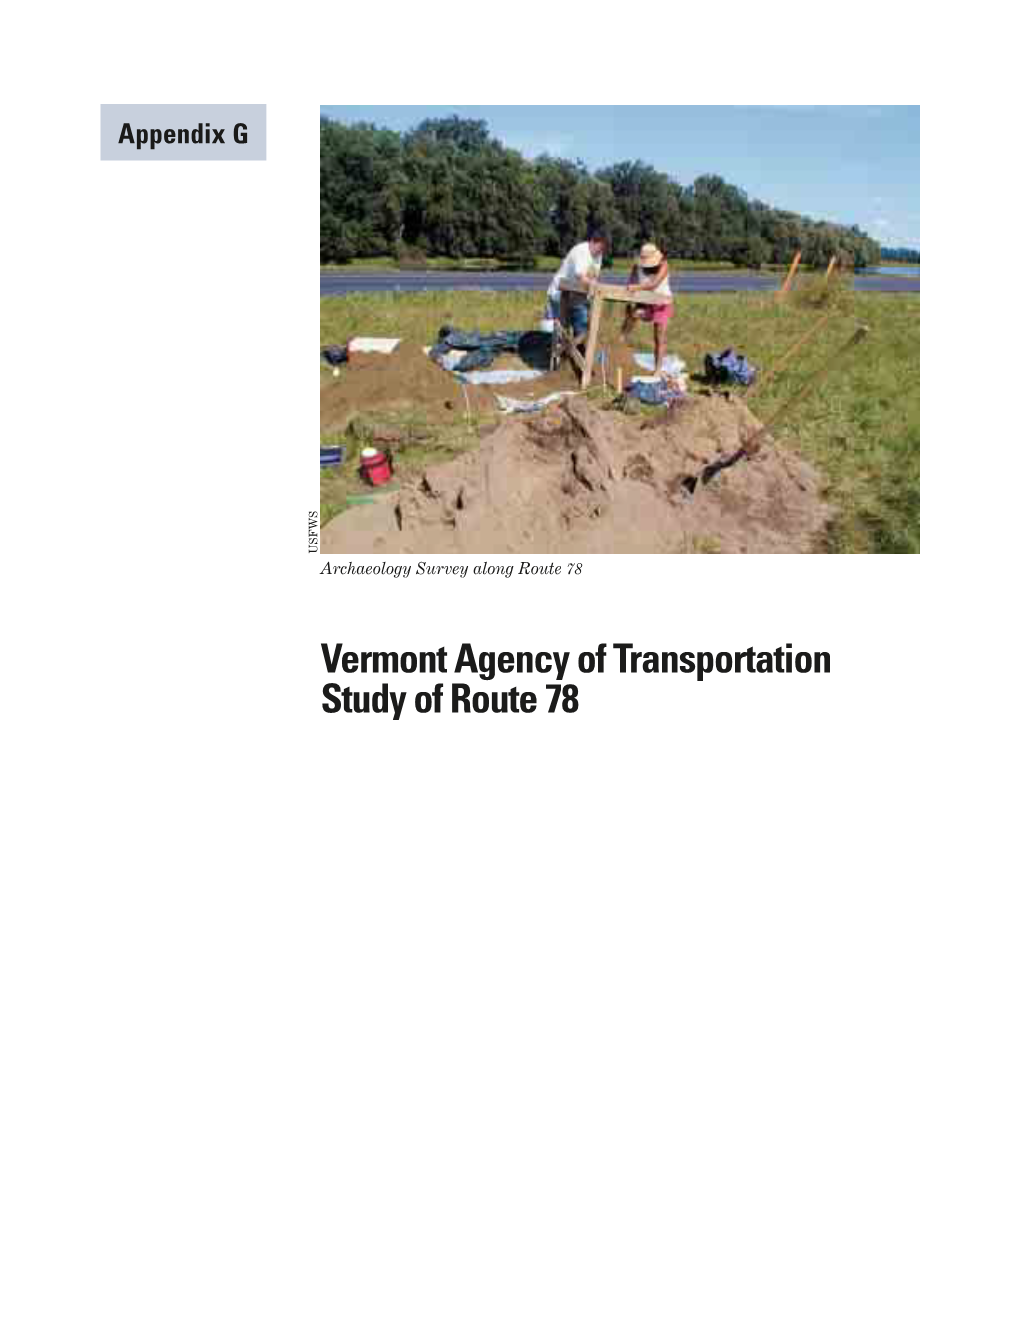 Appendix G. Vermont Agency of Transportation Study of Route 78 G-1 Vermont Agency of Transportation Study of Route 78